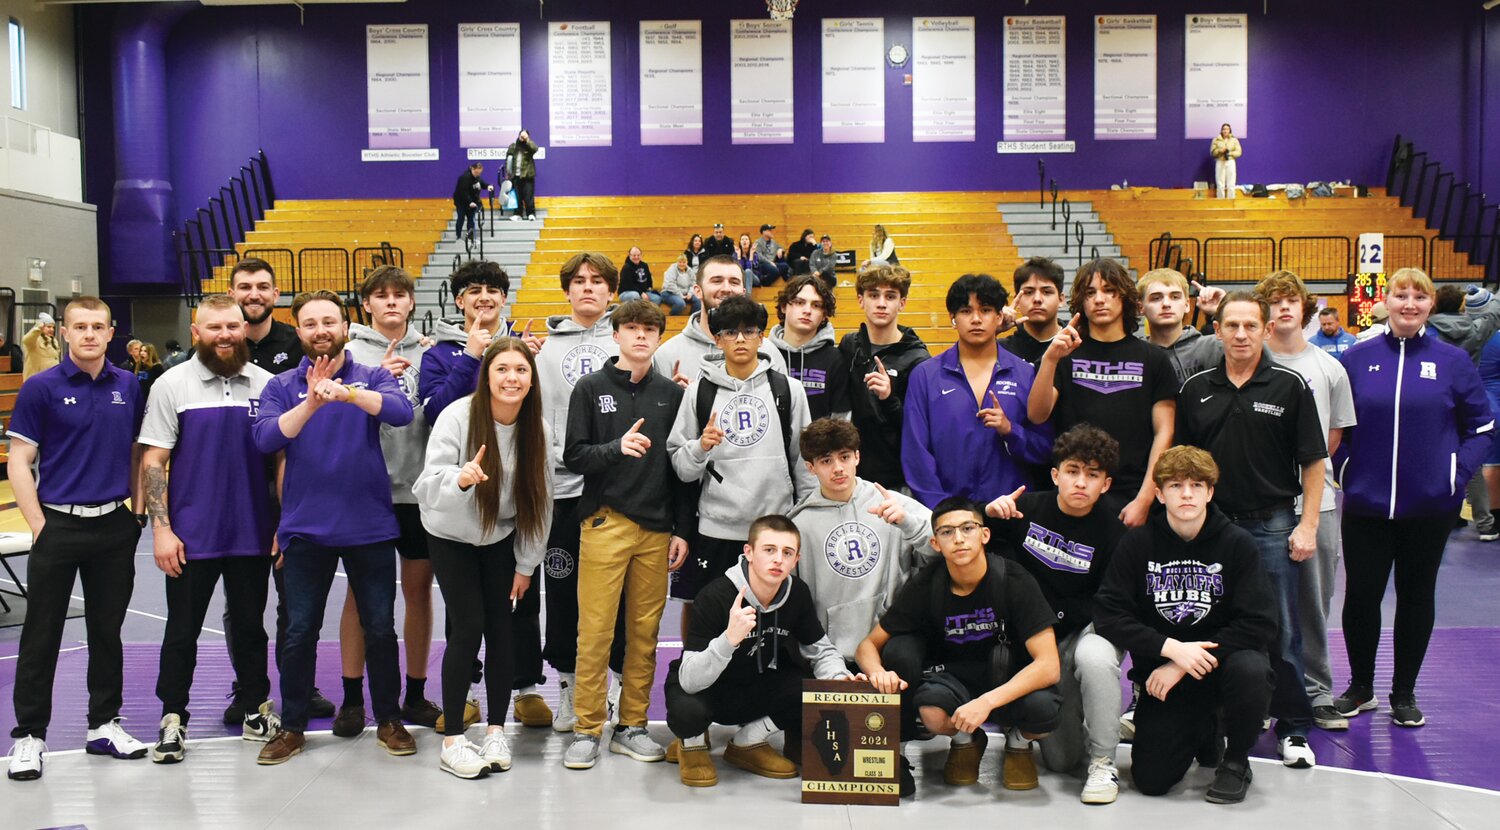 The Rochelle Hub varsity wrestling team won the IHSA 2A Rochelle Regional on Saturday, clinching a bid in the IHSA Dual Team Sectional at Rochelle later this month.